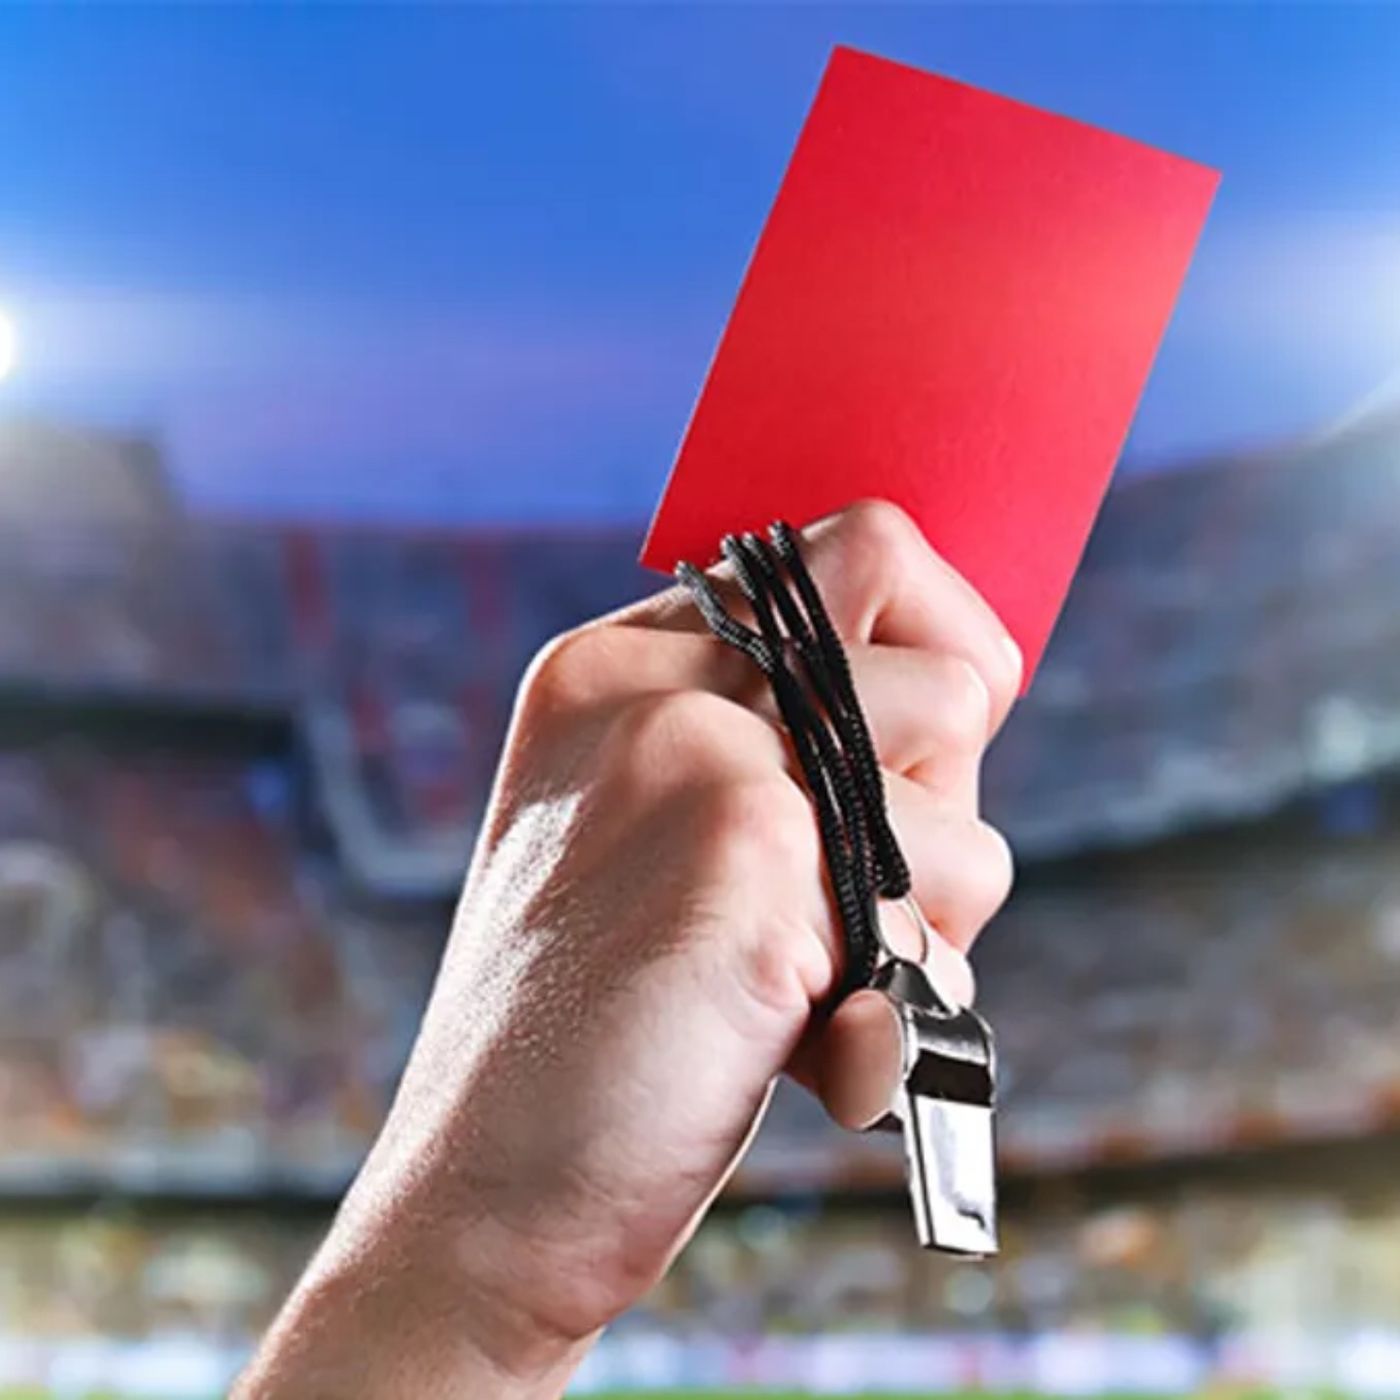 Soccer World Cup - red card for Qatar